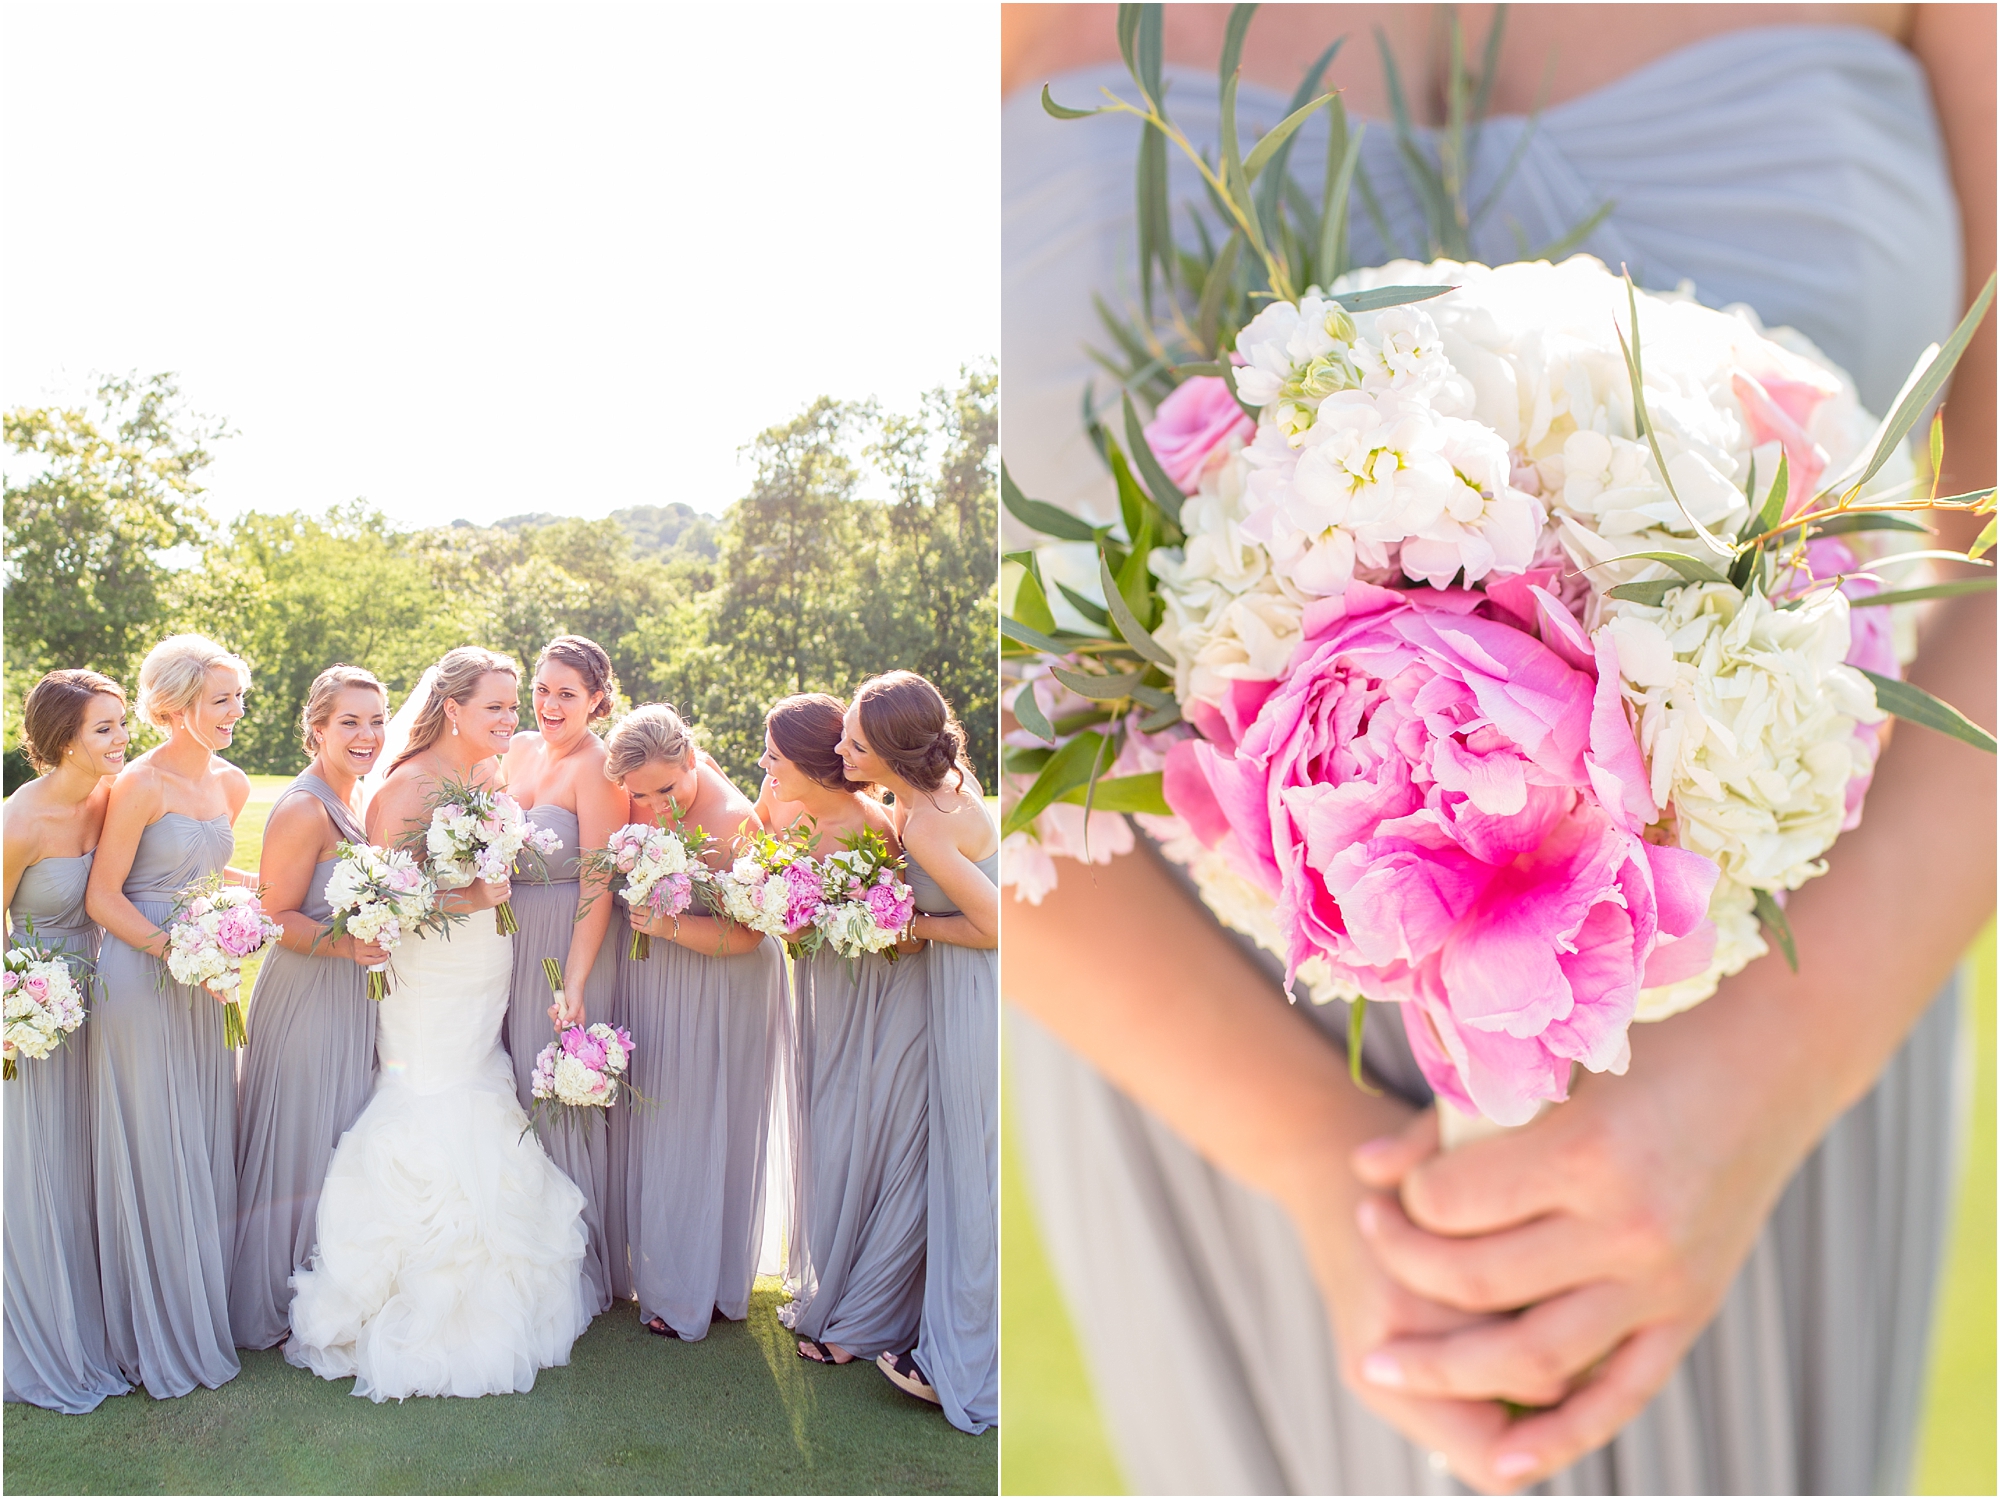 Peterson 4-Bridal Party-637_anna grace photography milford connecticut destination wedding photographer Great River Country Club photo.jpg